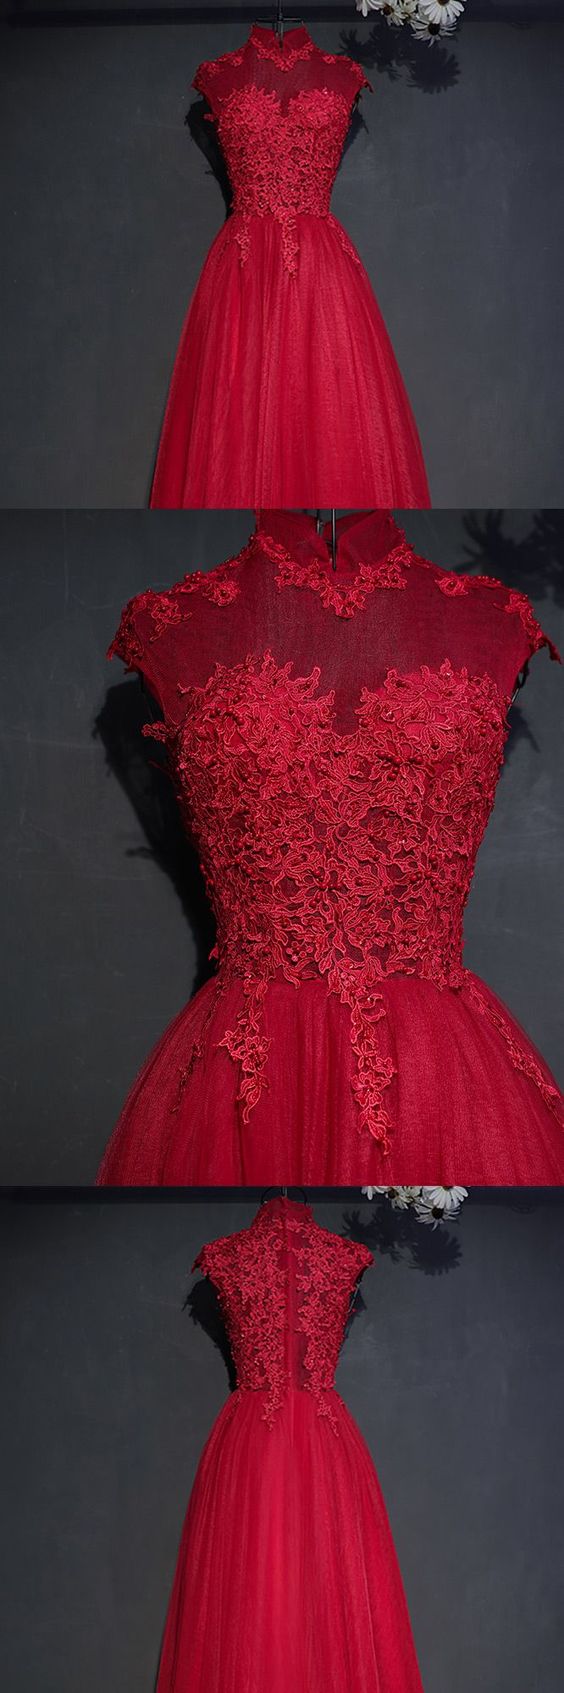 Vintage Lace High Neck Prom Dresses,long Tulle Prom Party Dress Burgundy,sexy Party Dress,custom Made Evening Dress